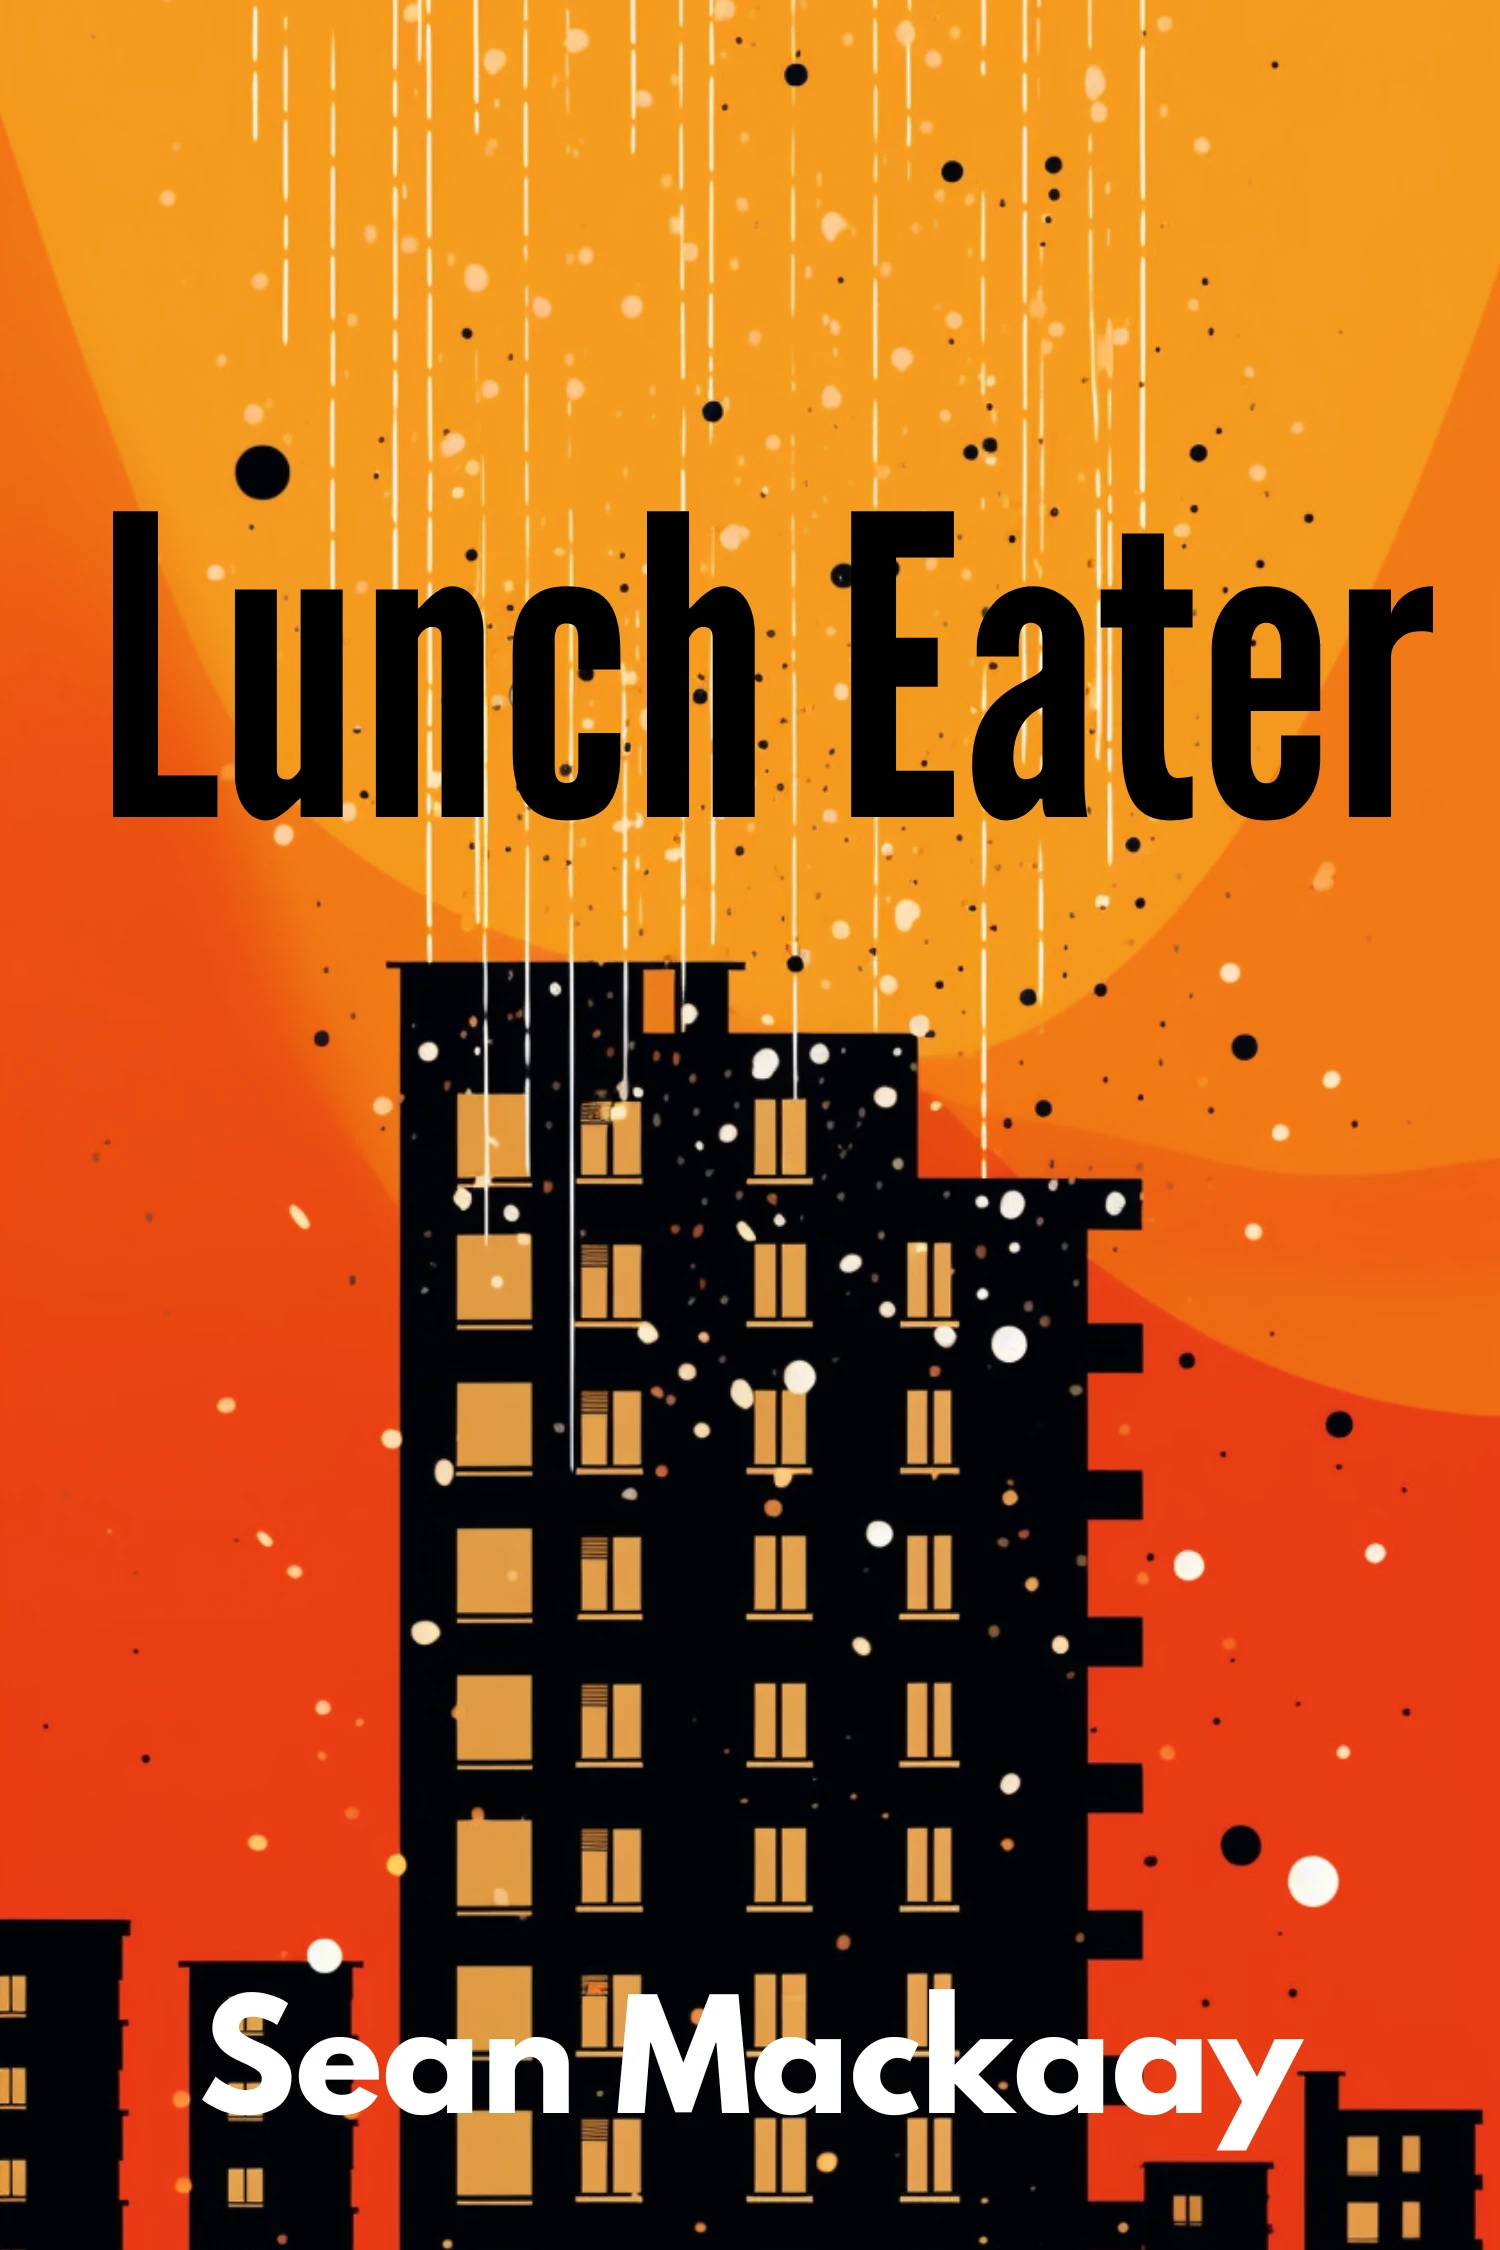 Lunch Eater